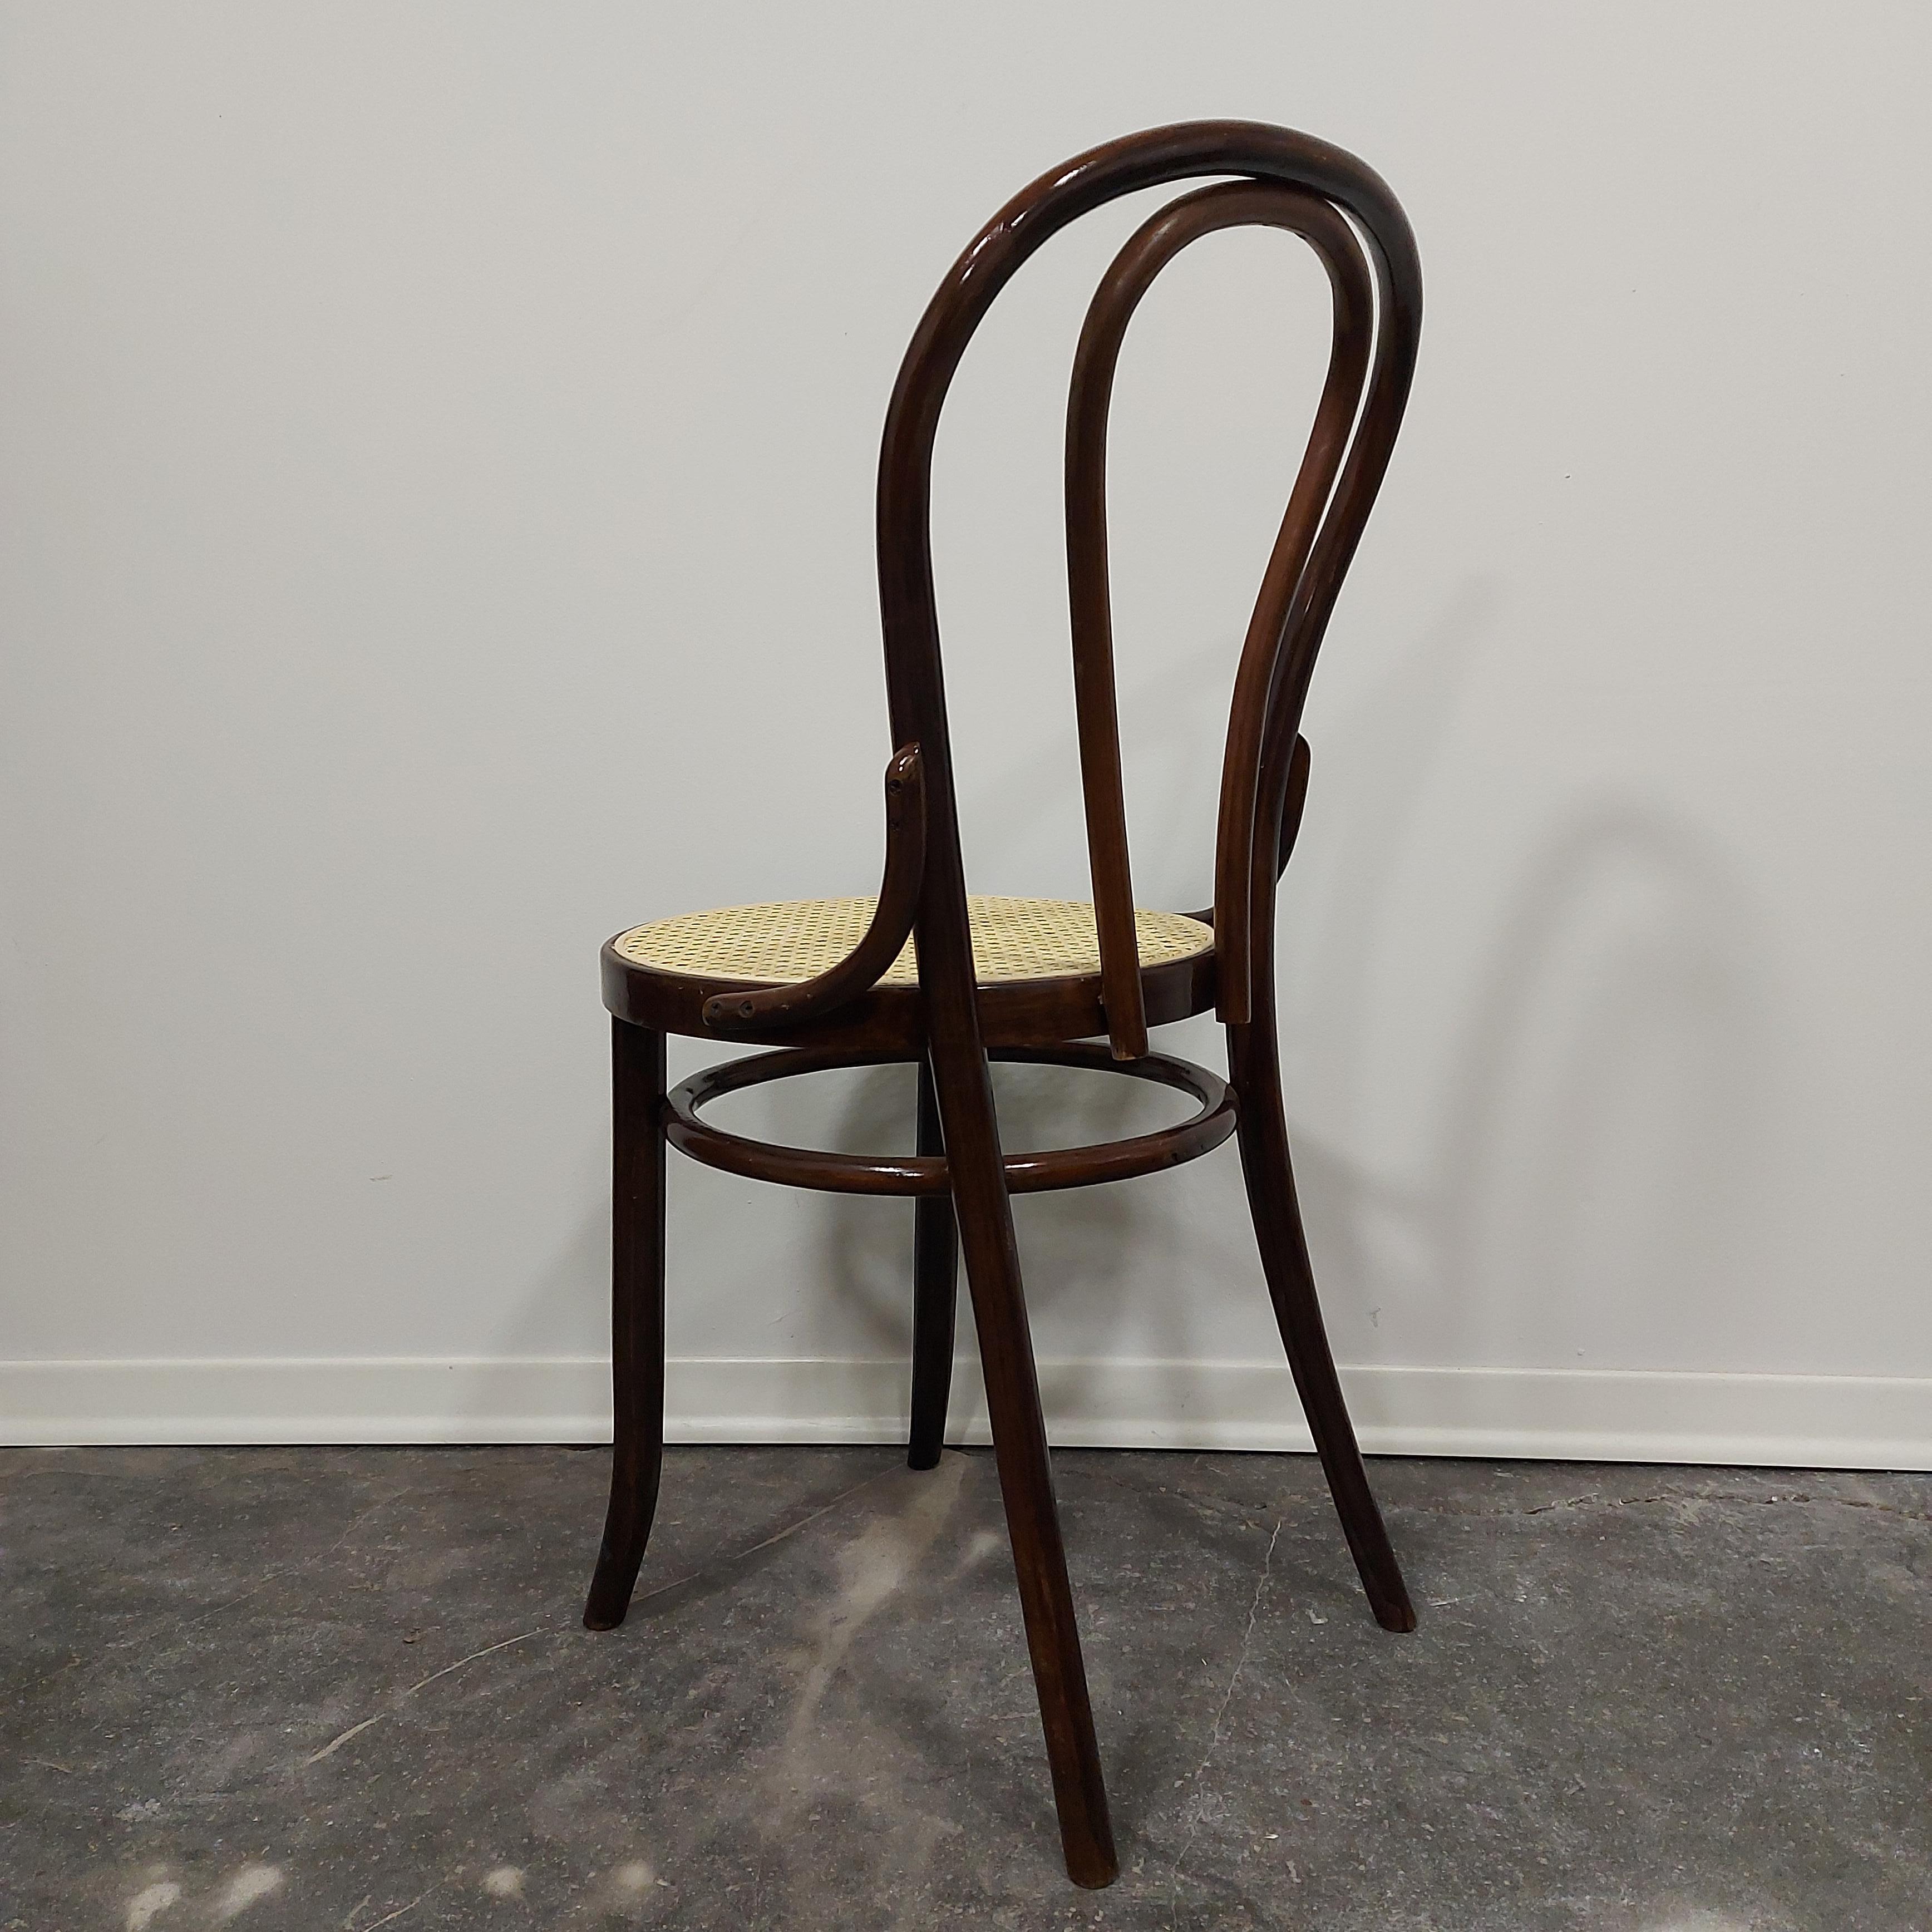 Thonet Dining chair No. 18 